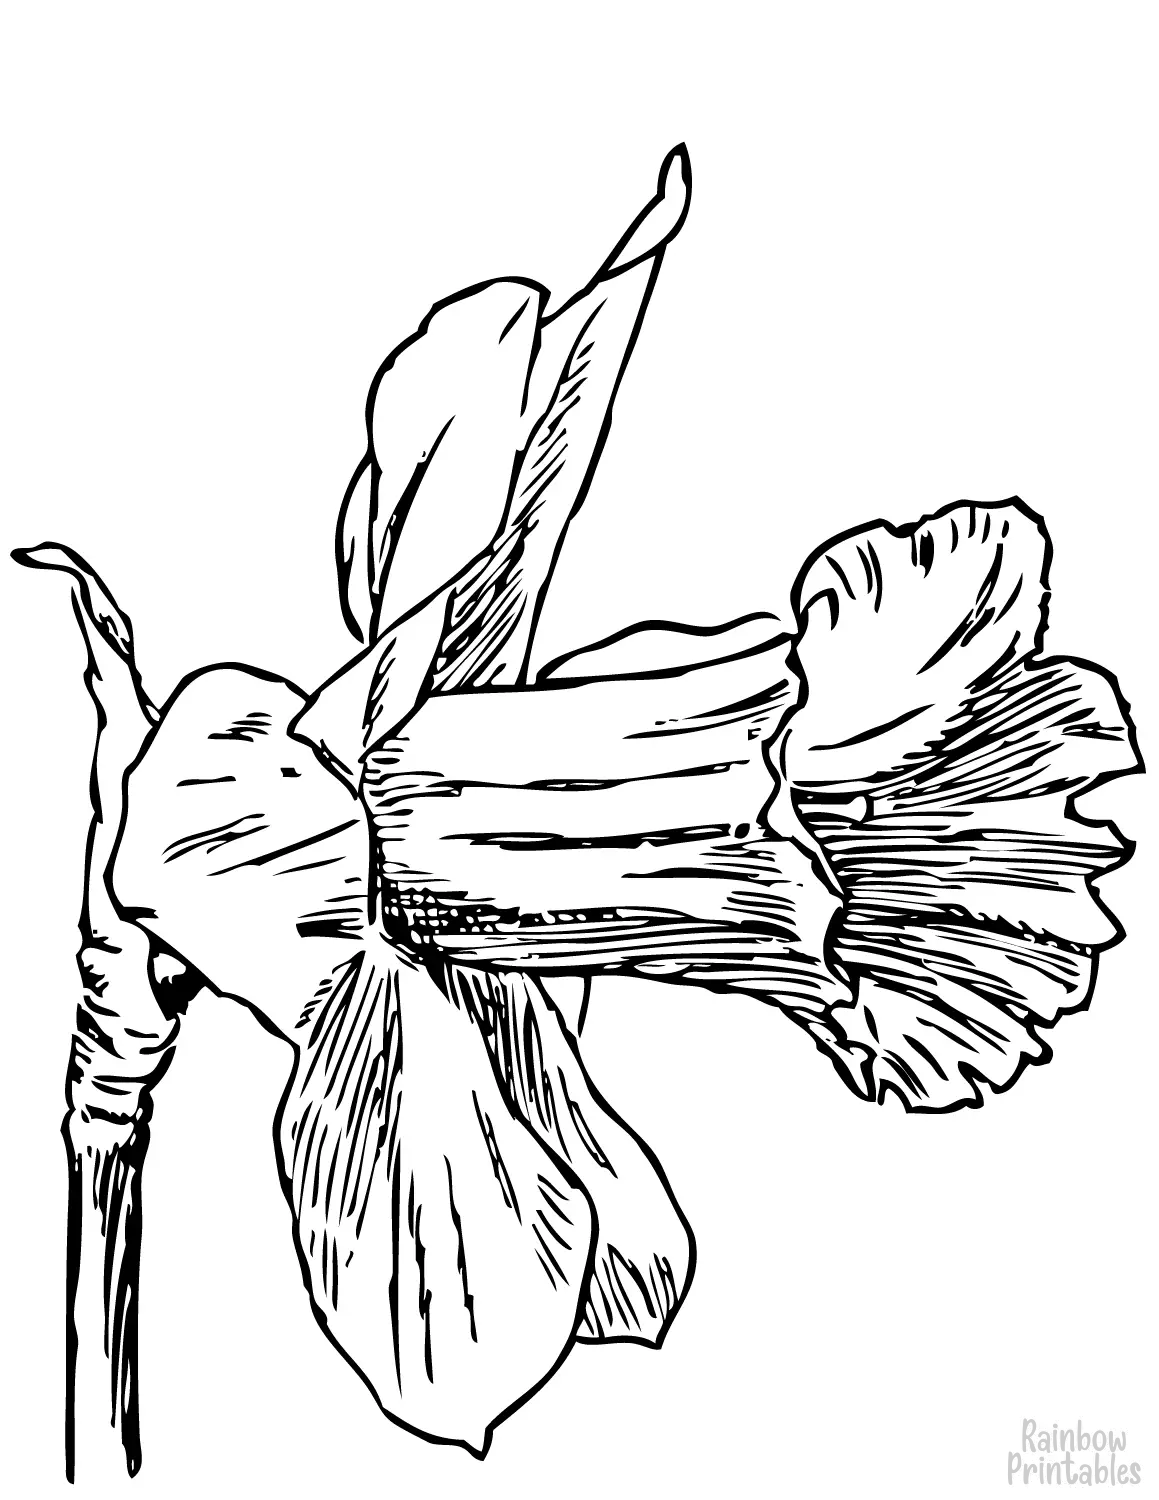 SIMPLE-EASY-line-drawings-DAFFODILS-coloring-page-for-kids Outline